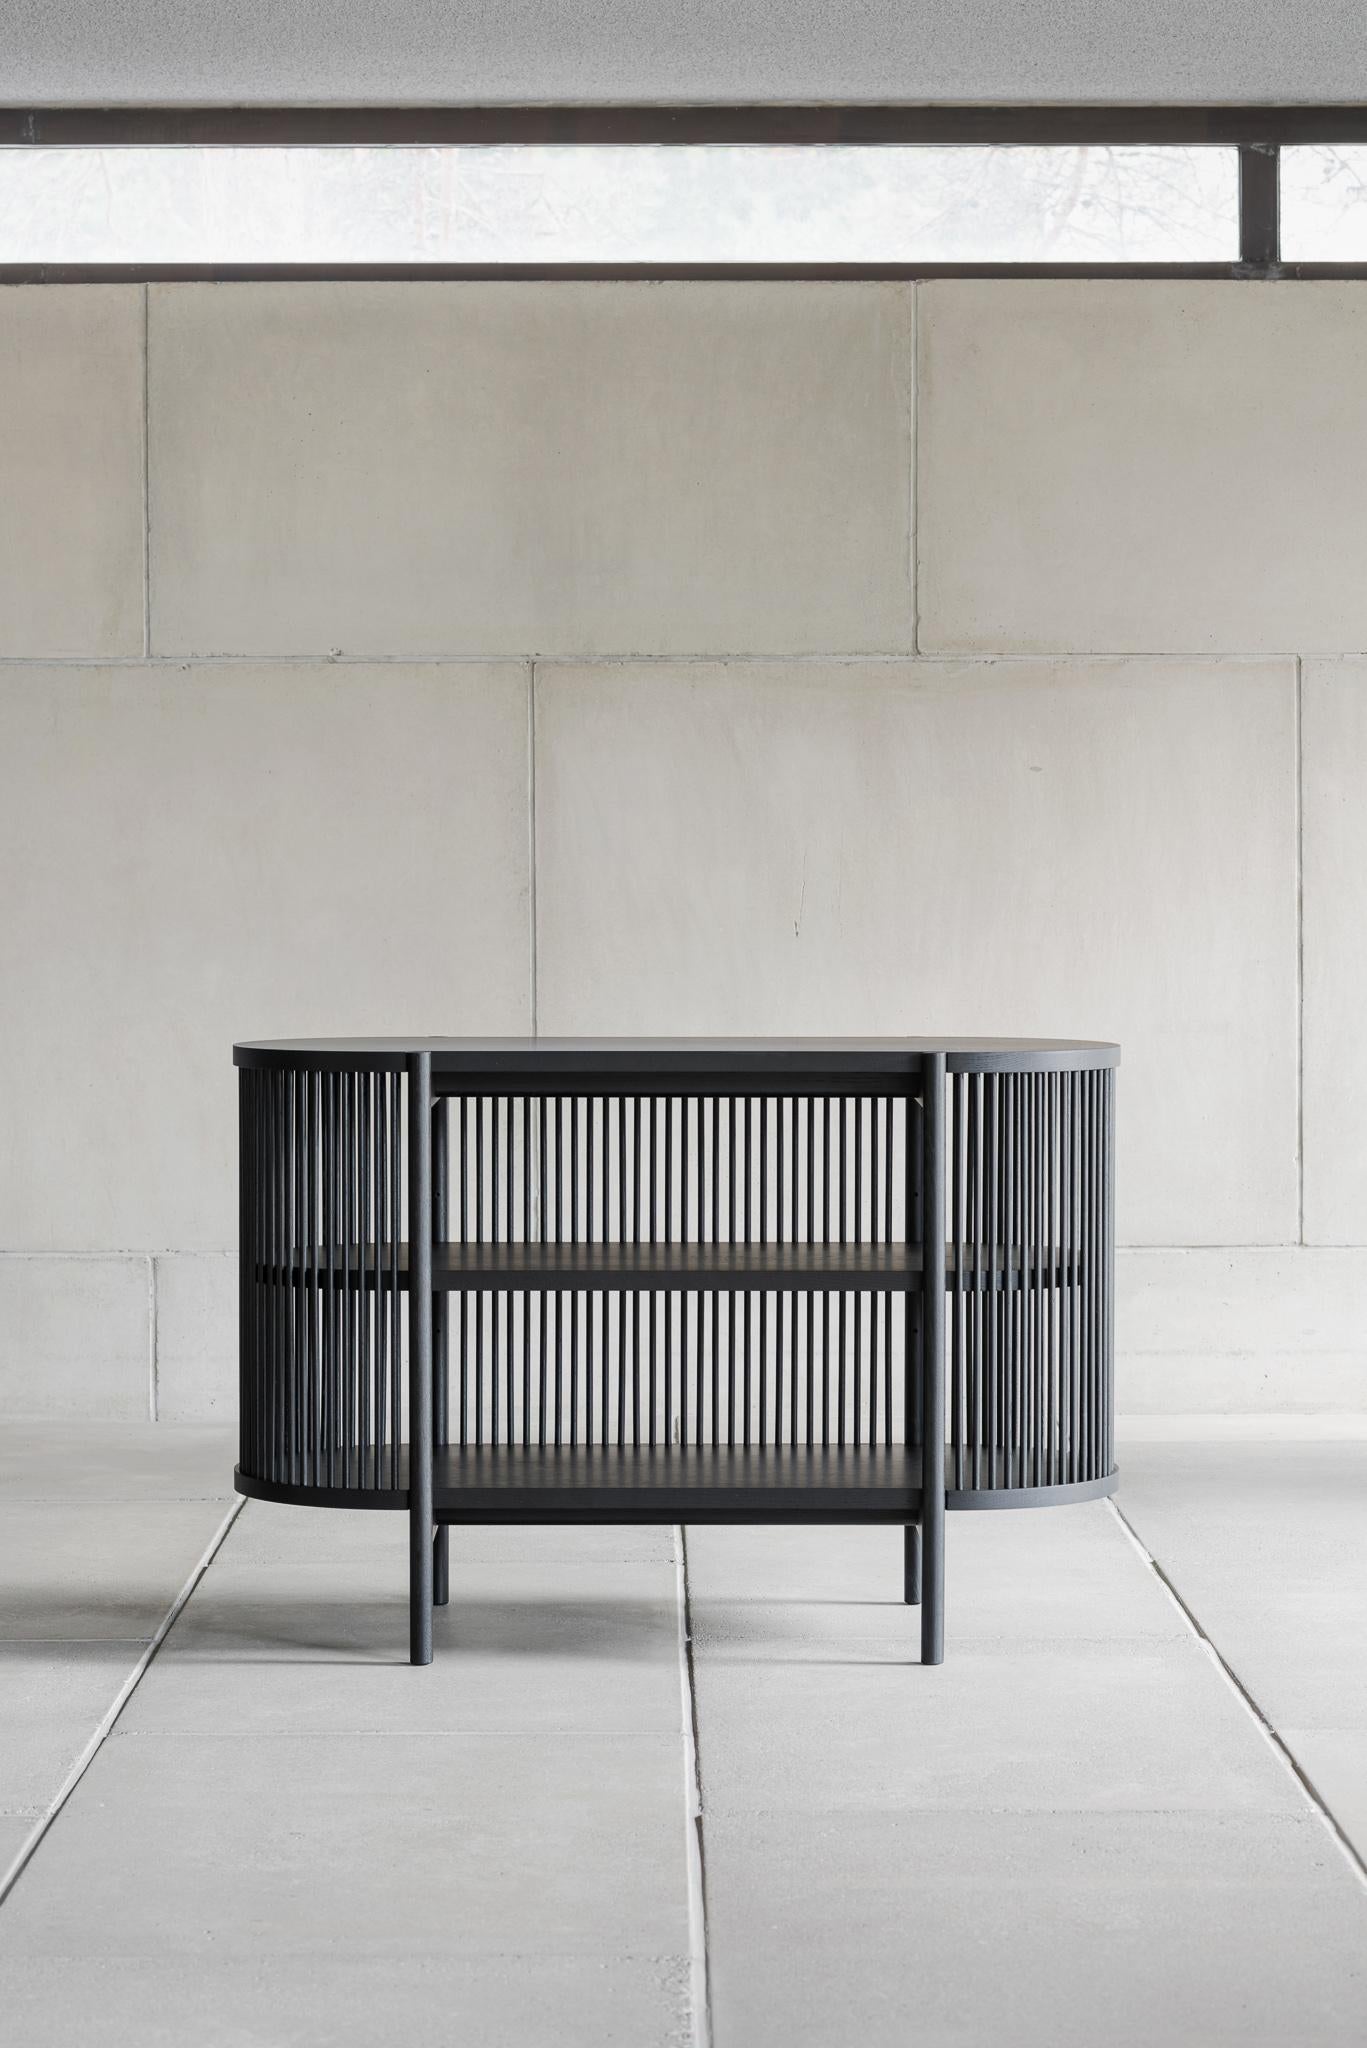 The Petit Bastone sideboard is a new addition to the Bastone case piece collection. It is designed by the master cabinet maker and designer Antrei Hartikainen for Poiat.

Somewhere on the boundary of art and design, the collection showcases the